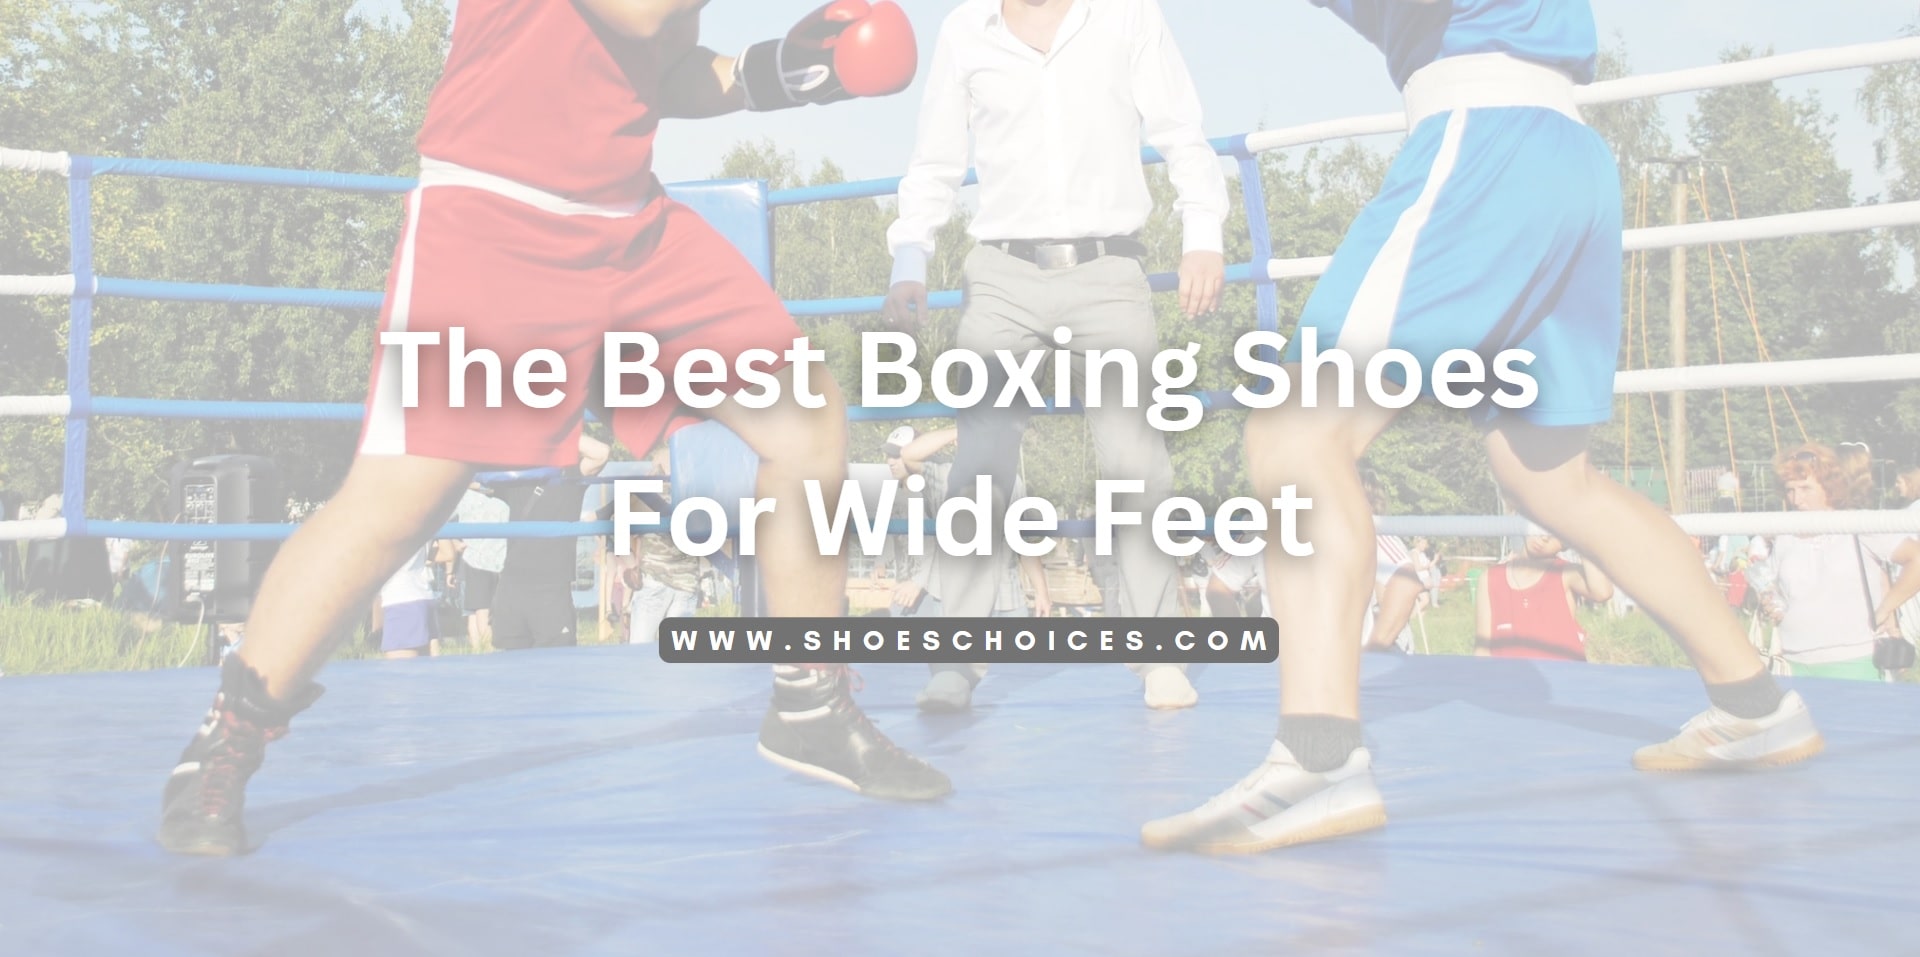 The Best Boxing Shoes For Wide Feet